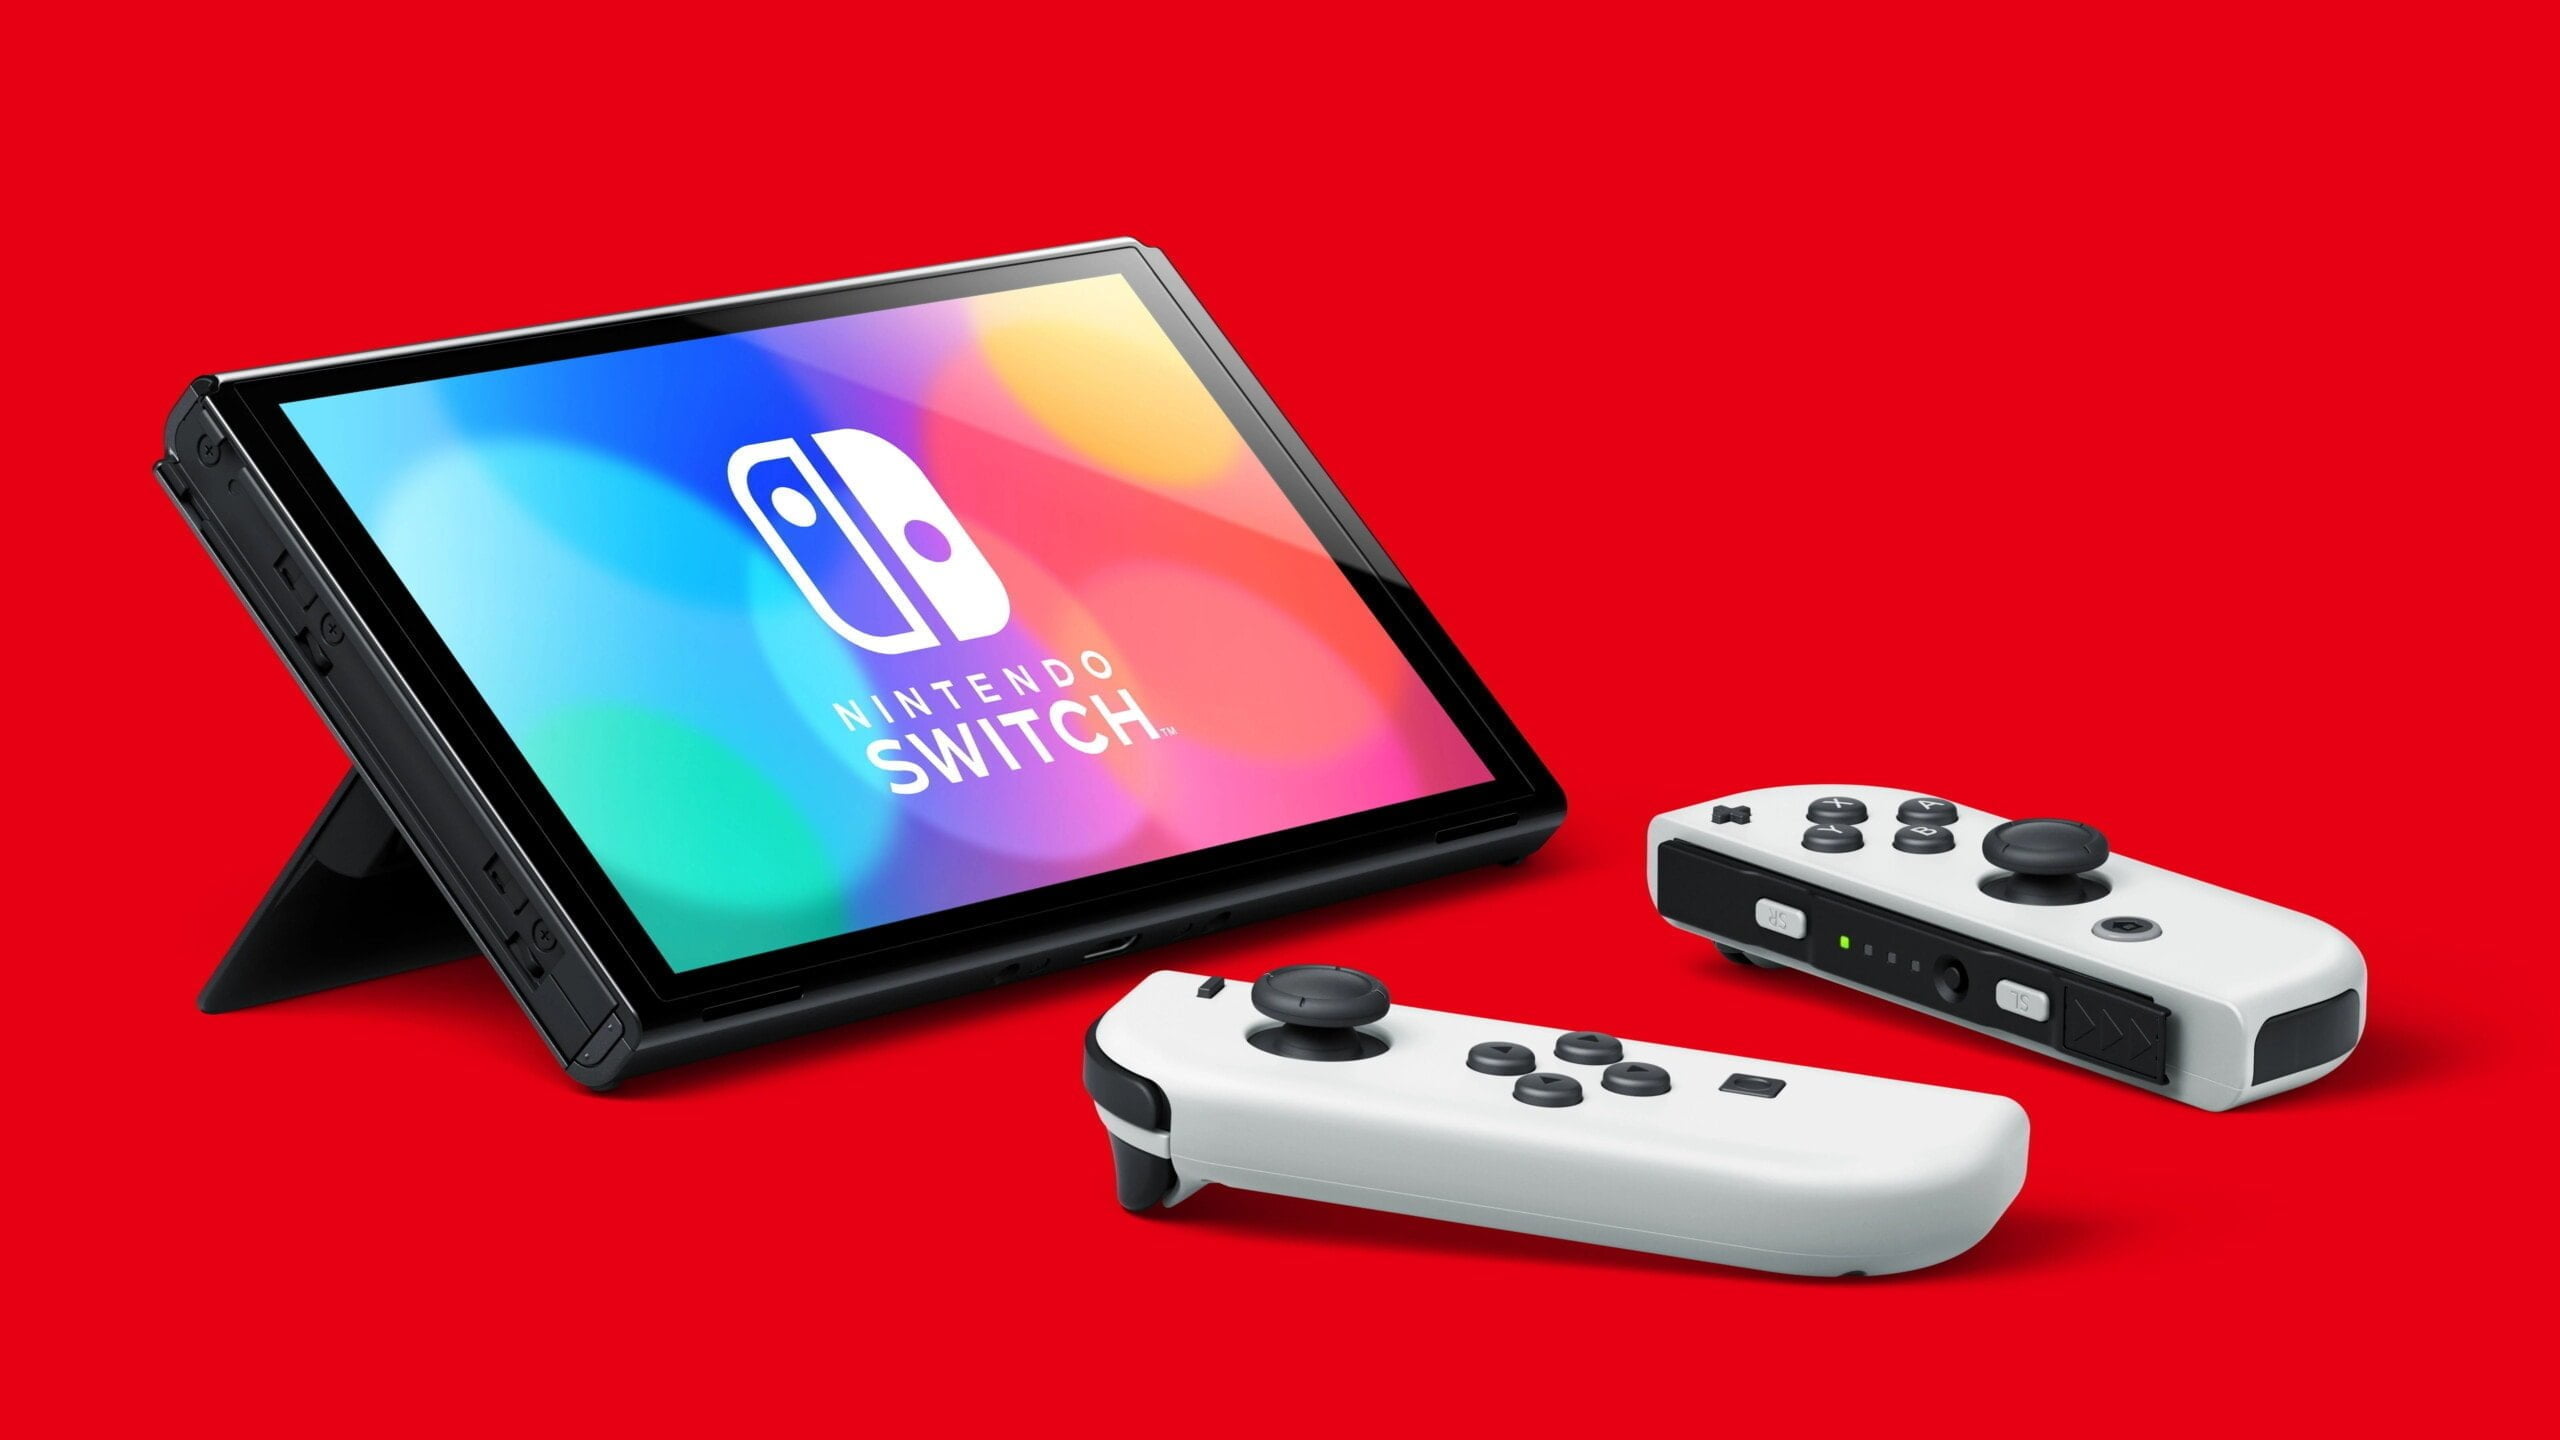 21 Nintendo Switch Oled Model Vs 17 Nintendo Switch What S Different Other Than The Larger 7 Inch Oled Display News Dome